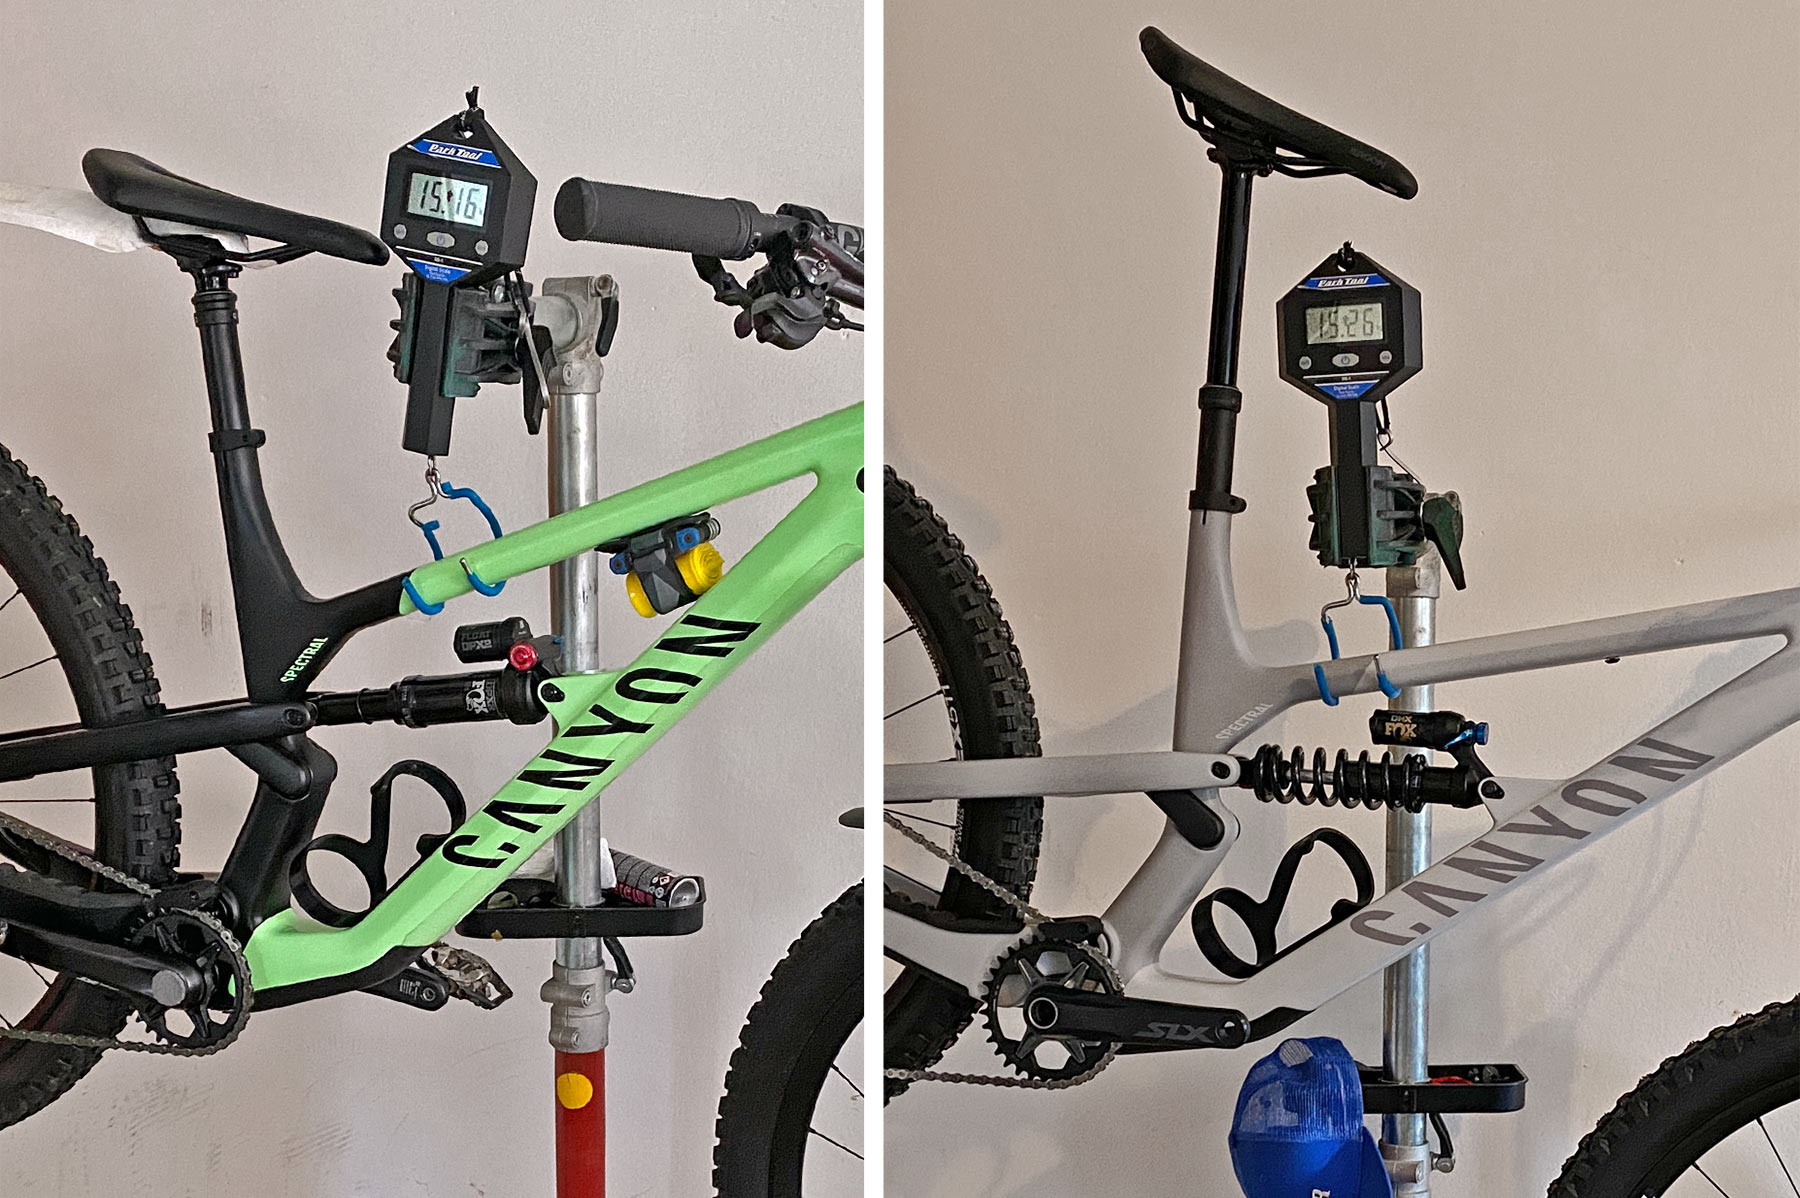 Canyon Spectral 125mm MTB review, playful rowdy carbon short-travel enduro all-mountain bike, 15kg Spectral actual weight comparison